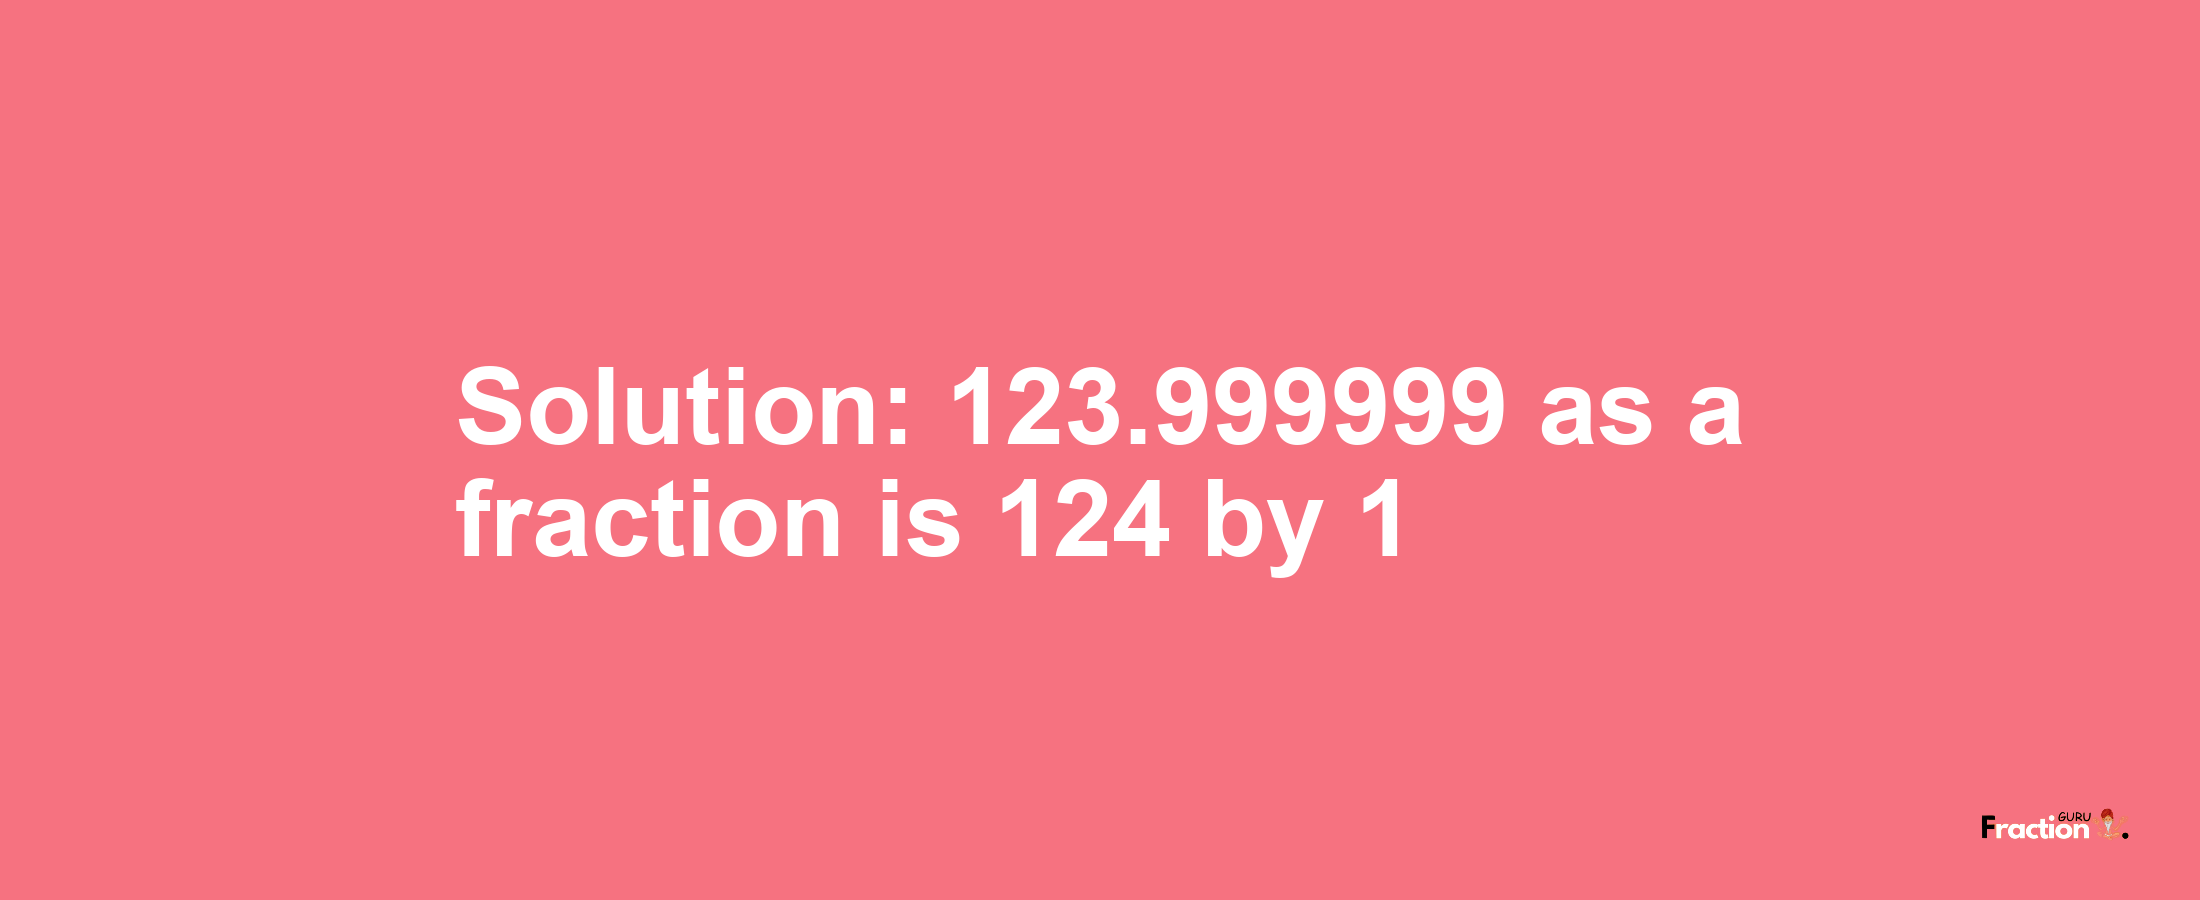 Solution:123.999999 as a fraction is 124/1